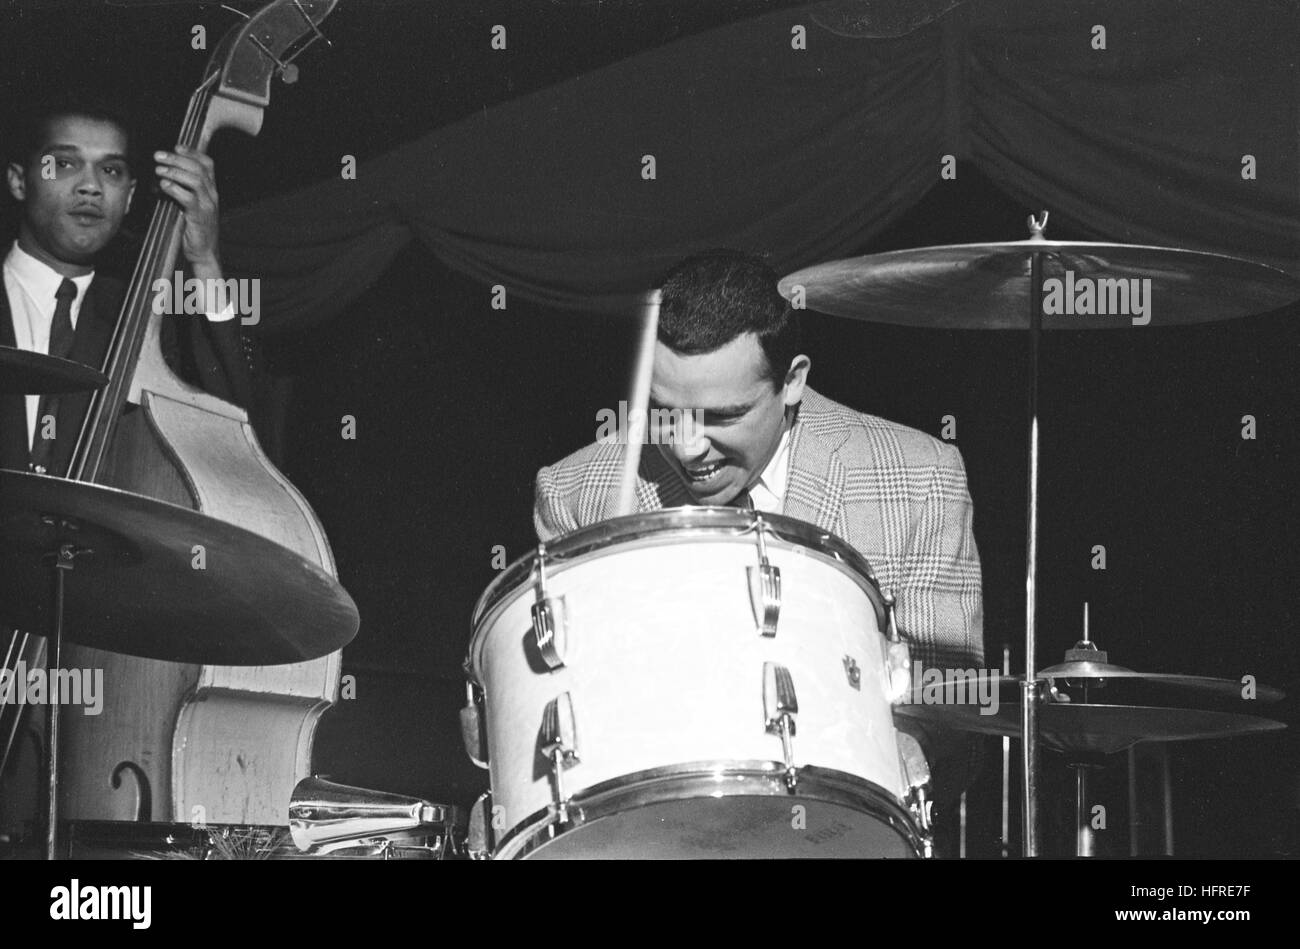 Buddy Rich on drums and Curly Russell on bass, performing with the Harry James band, at the Band Box in New York City. Stock Photo